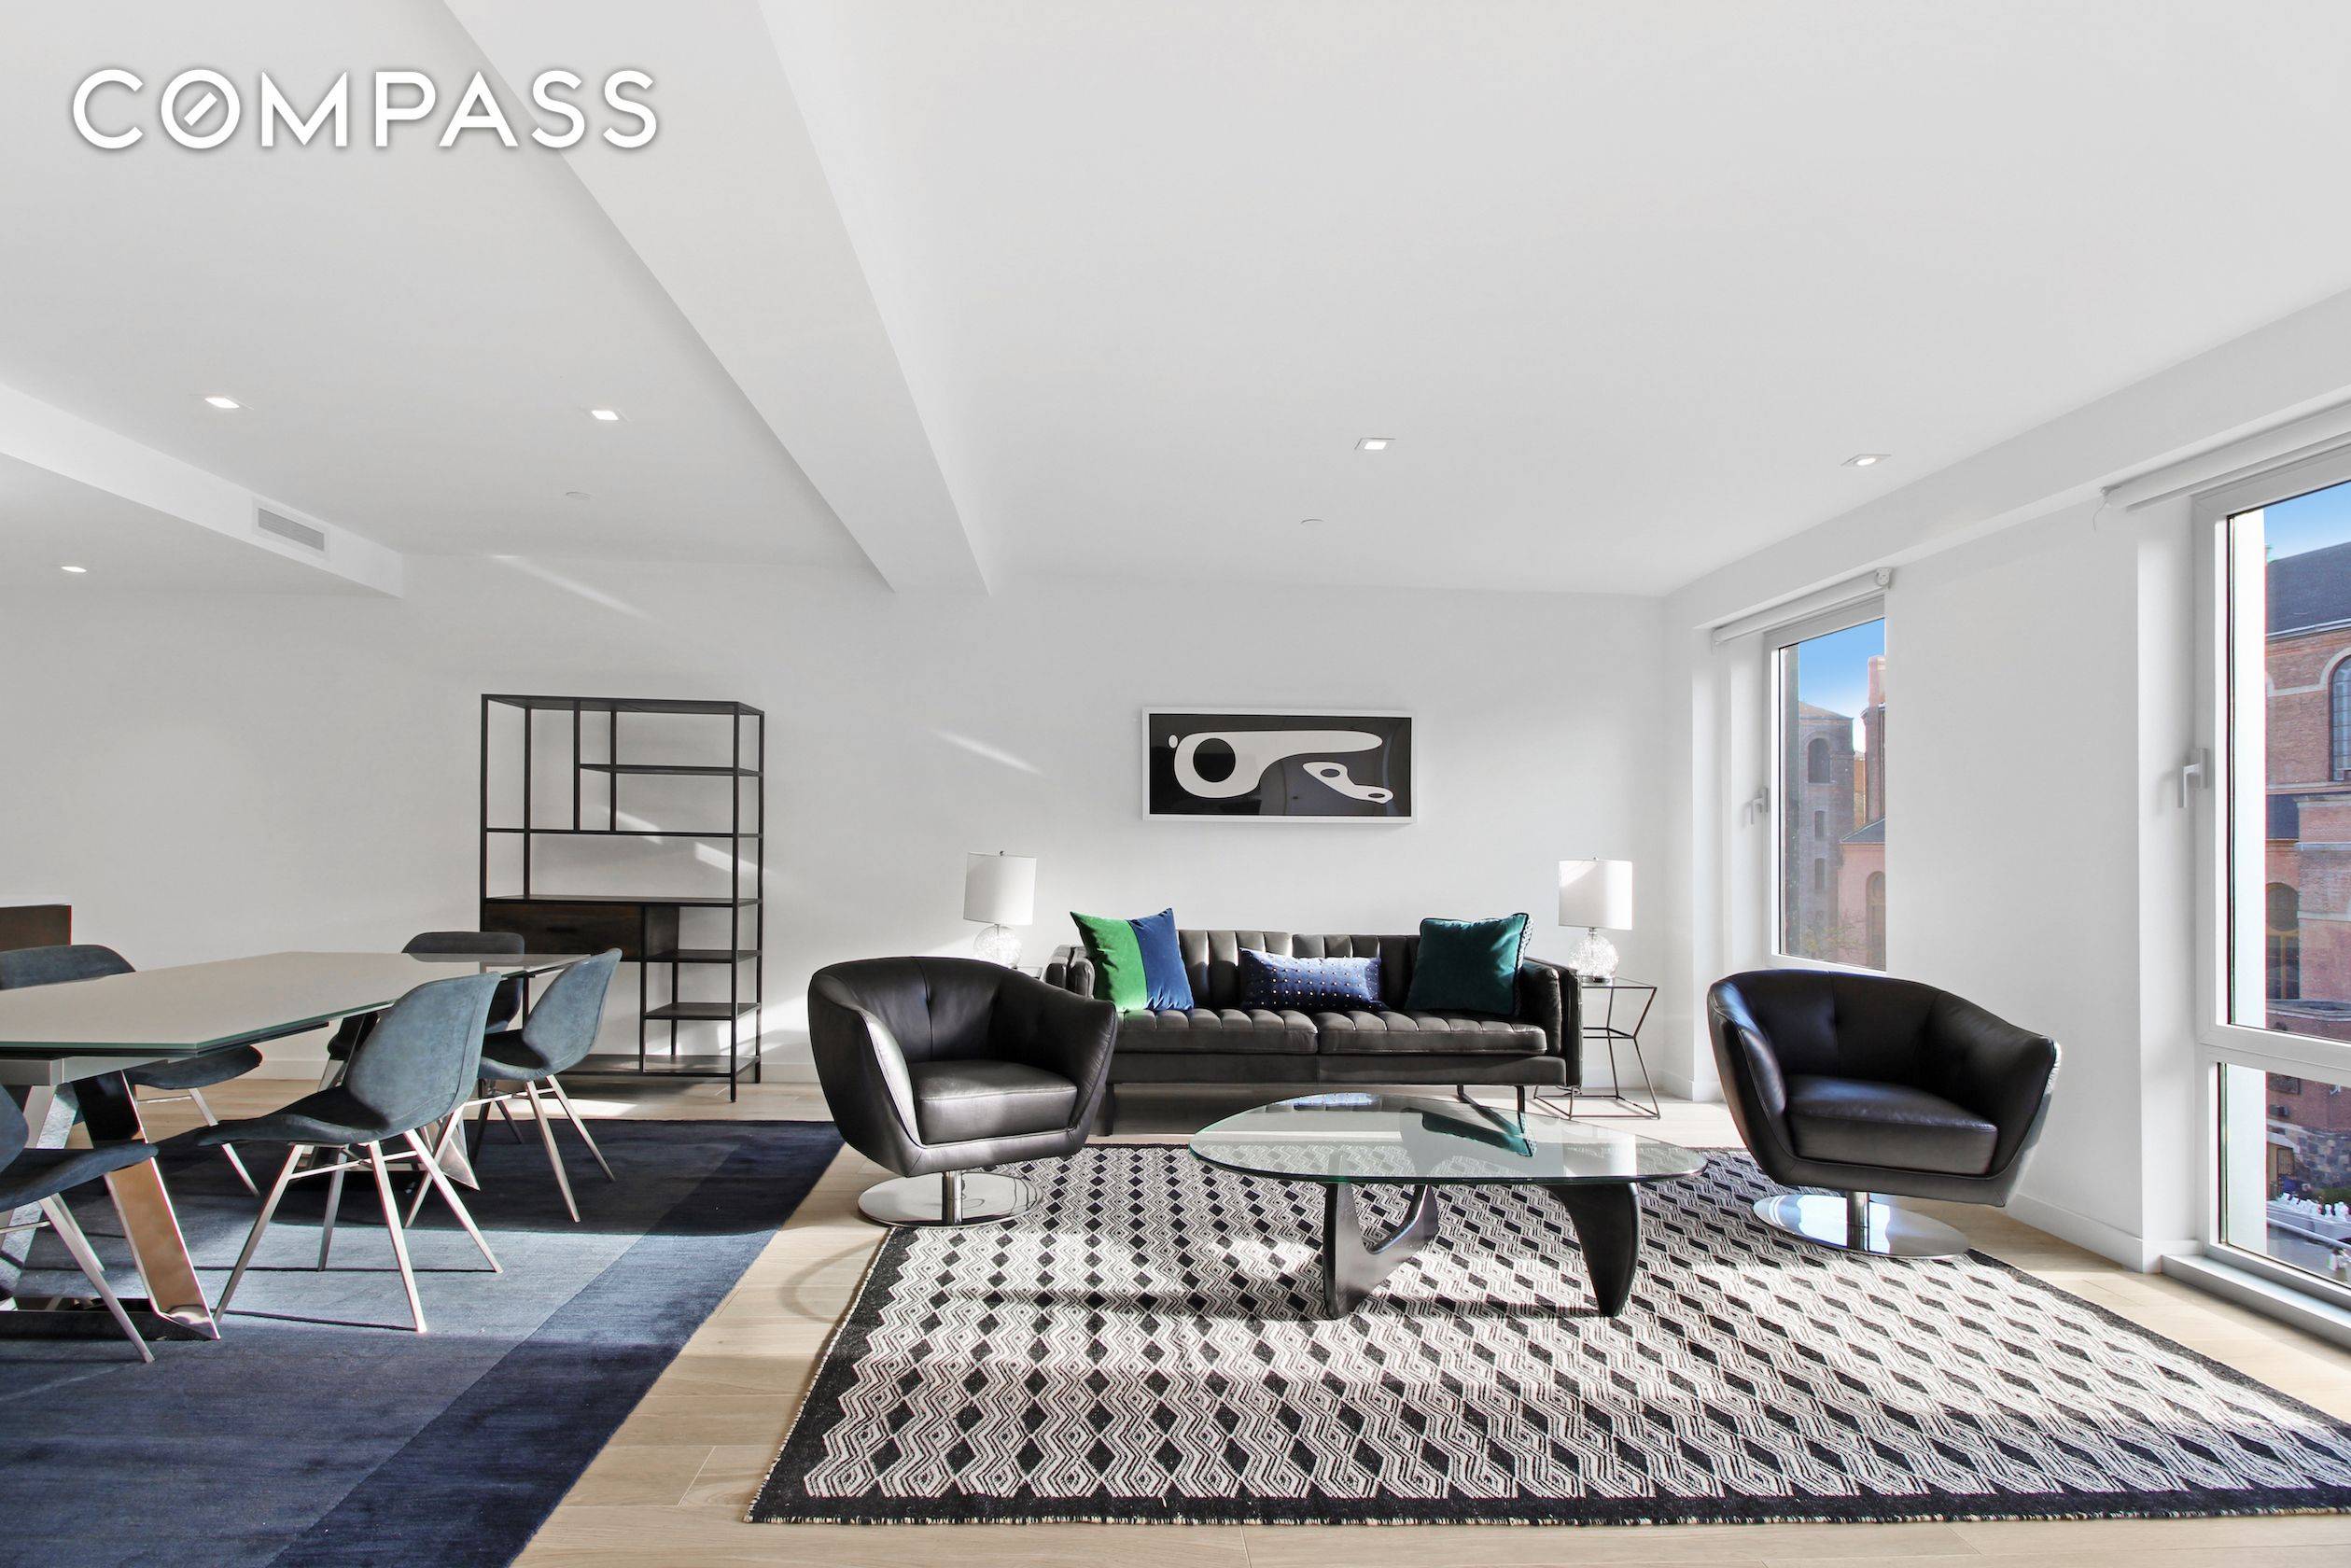 Showings and Open House are by Appointment Only, Please Schedule in Advance Welcome to your stunning full floor home in the most desirable neighborhood in New York City.